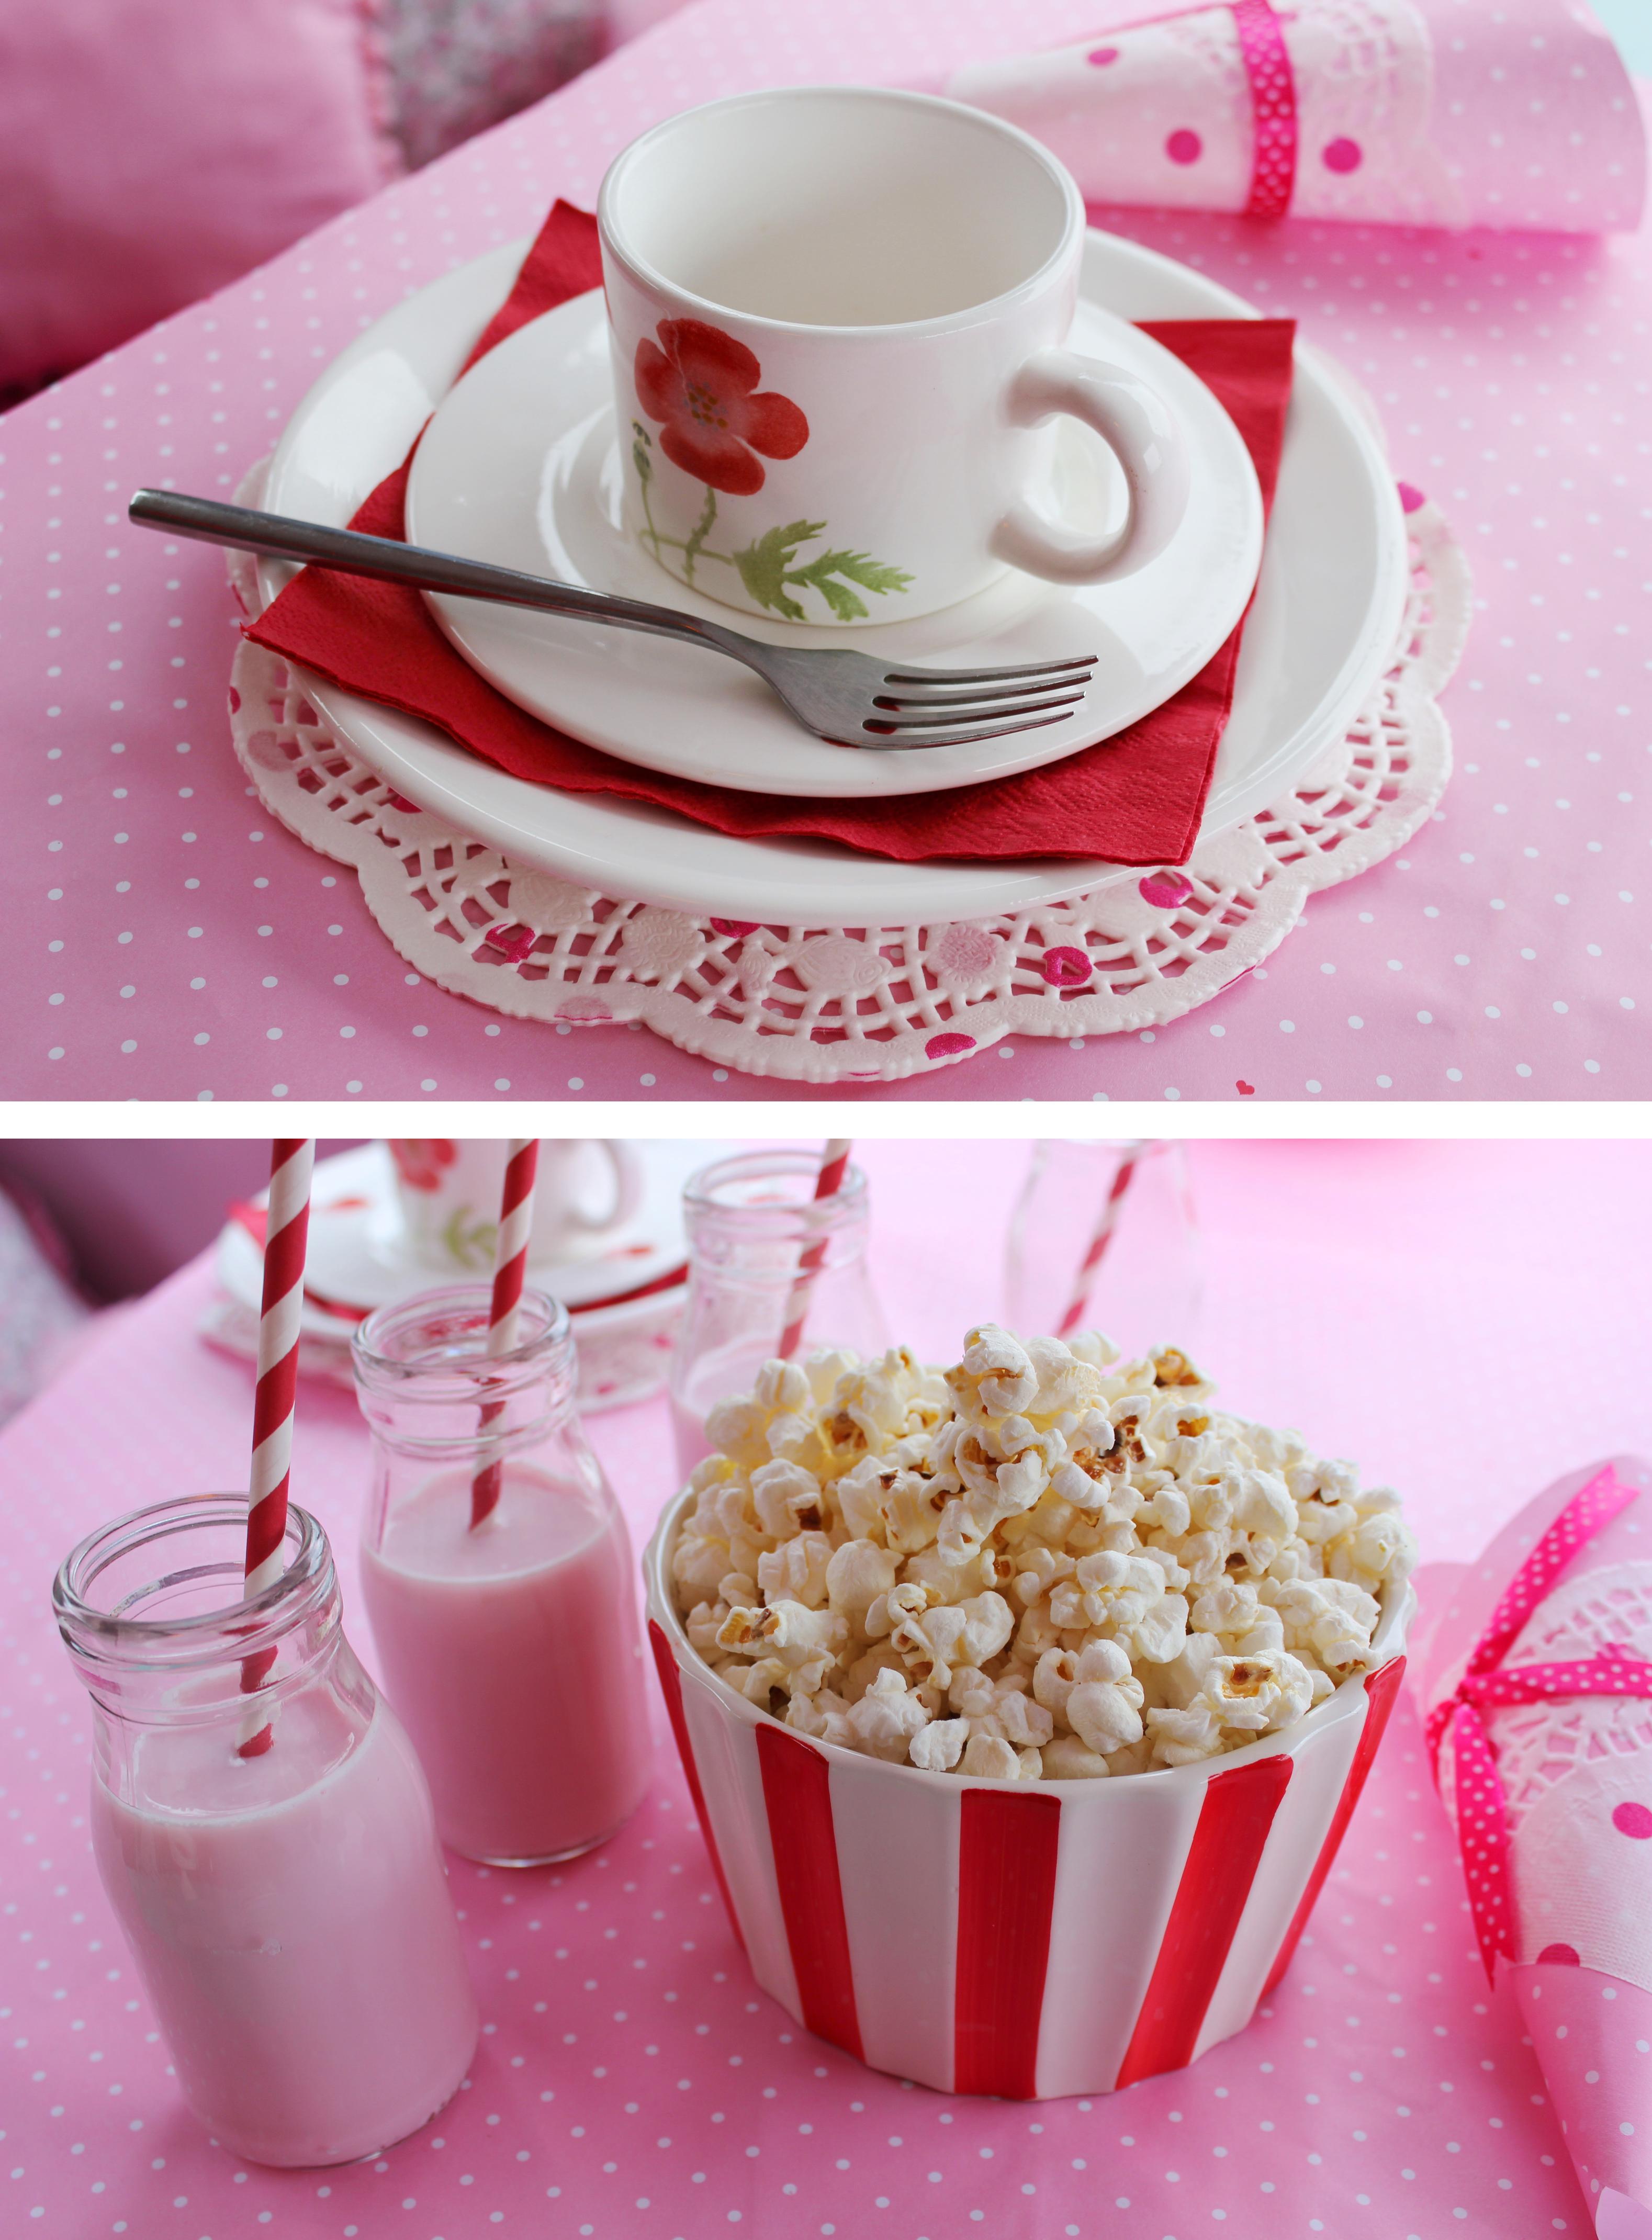 pink and red party theme afternoon tea milkshake and popcorn